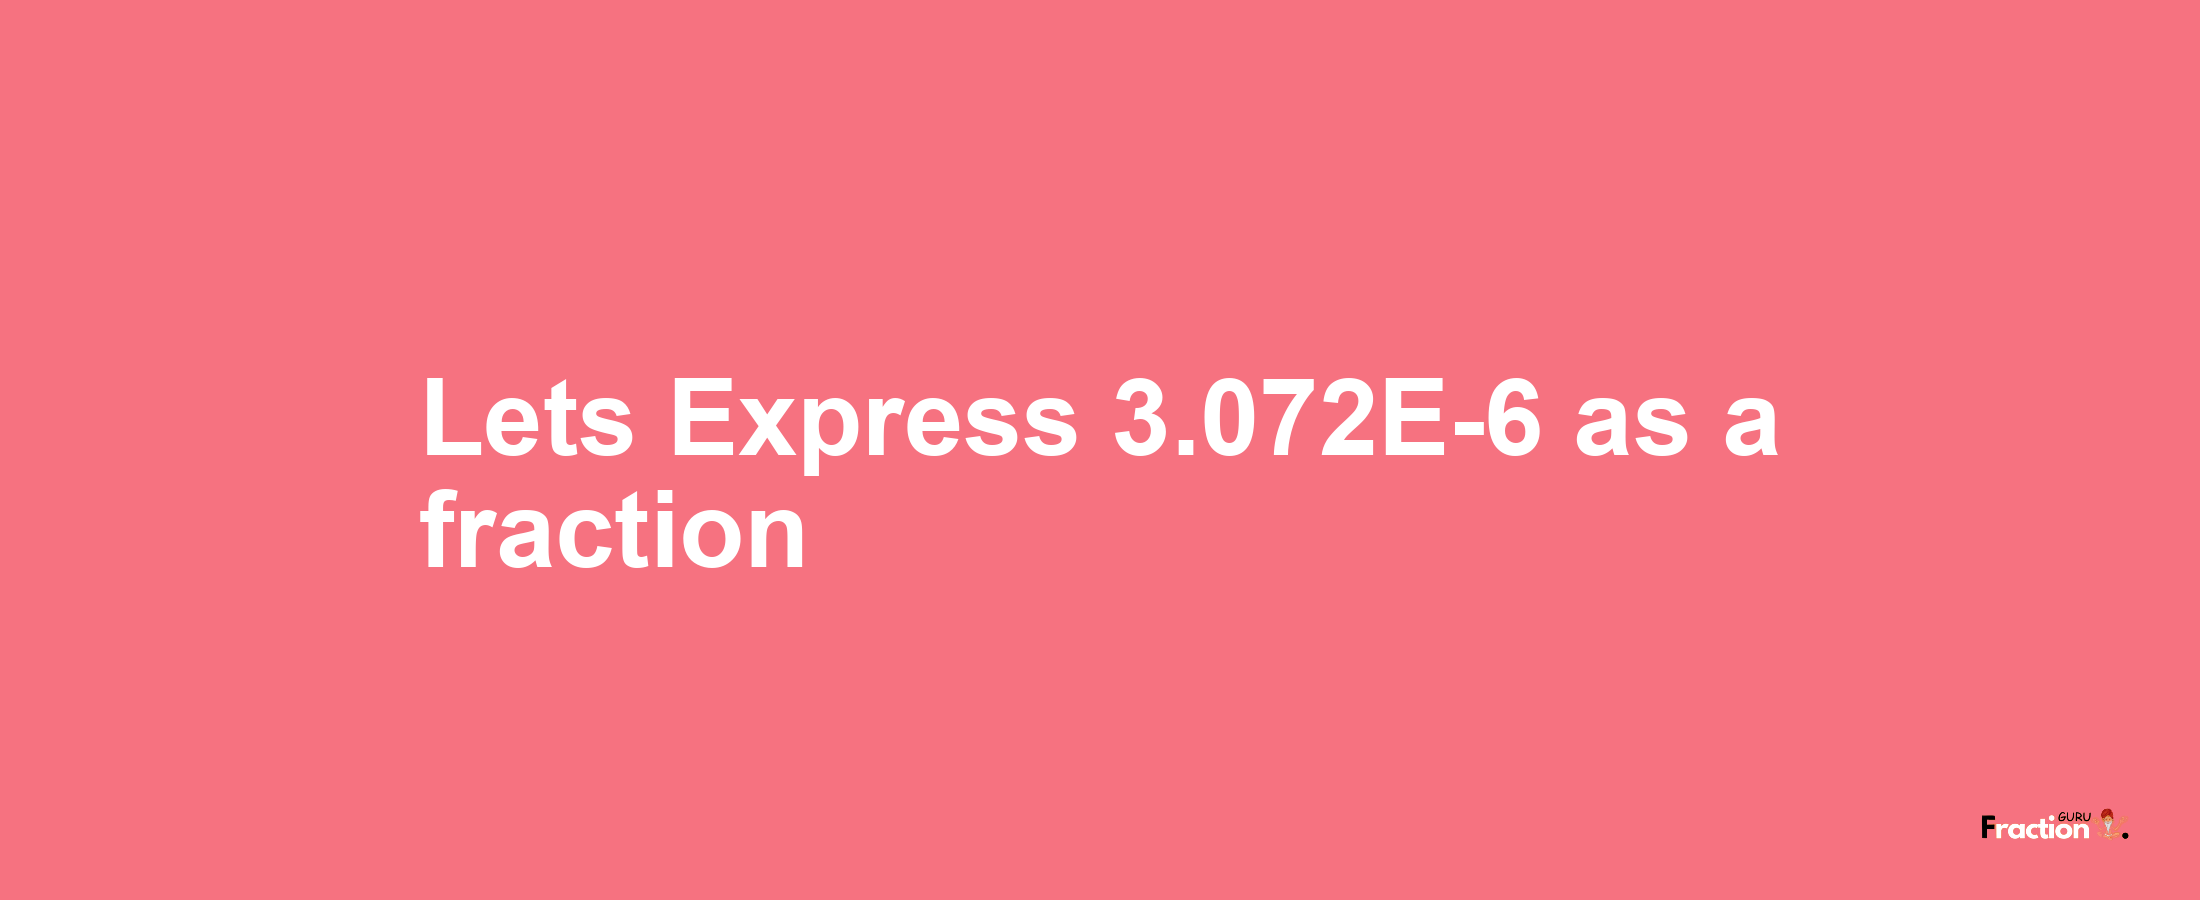 Lets Express 3.072E-6 as afraction